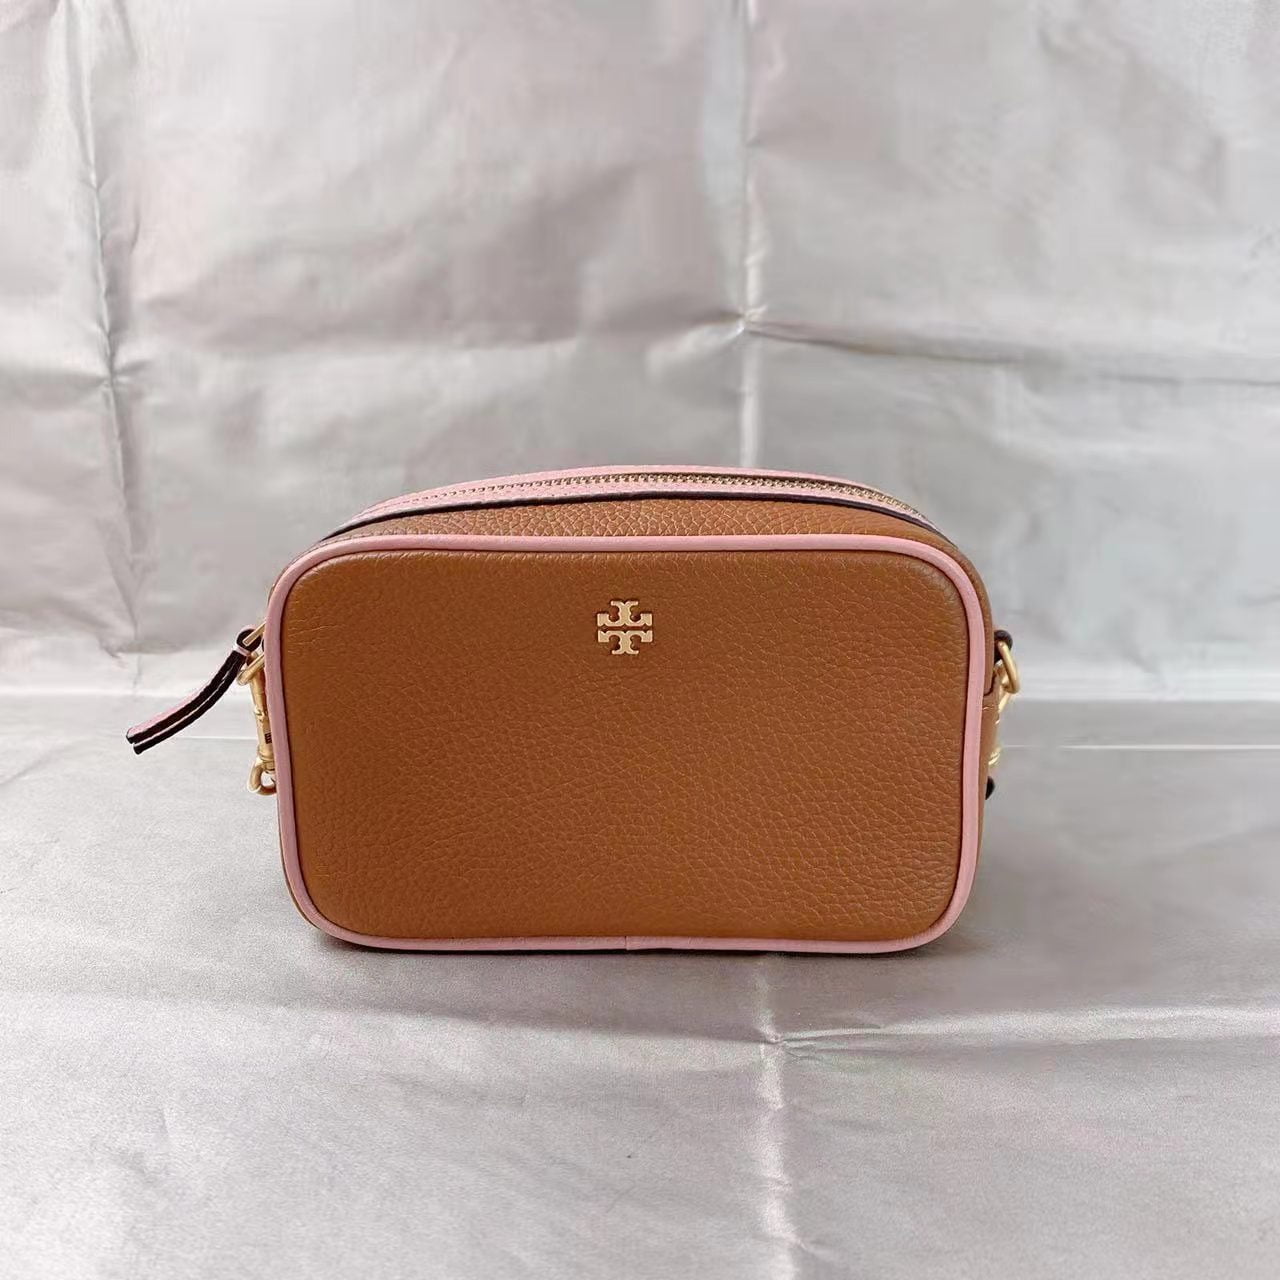 Buy Tory Burch 801220821 Womens Blake Mini Camera Bag In Cortado Pink  Online at Lowest Price in Ubuy France. 492563095